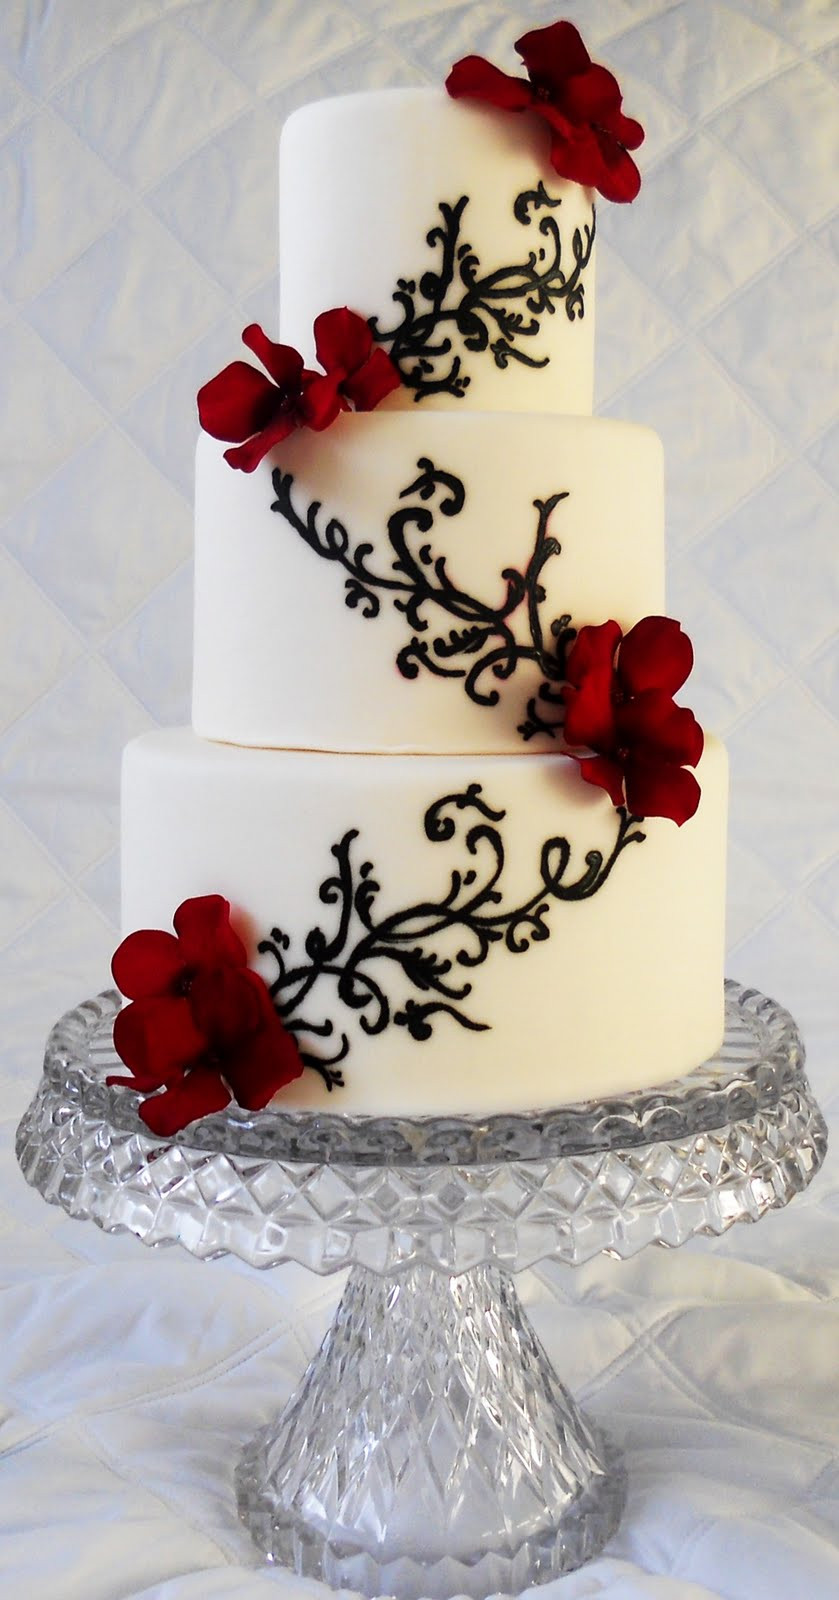 Black White And Red Wedding Cakes
 Memorable Wedding Find the Best Red Black and White